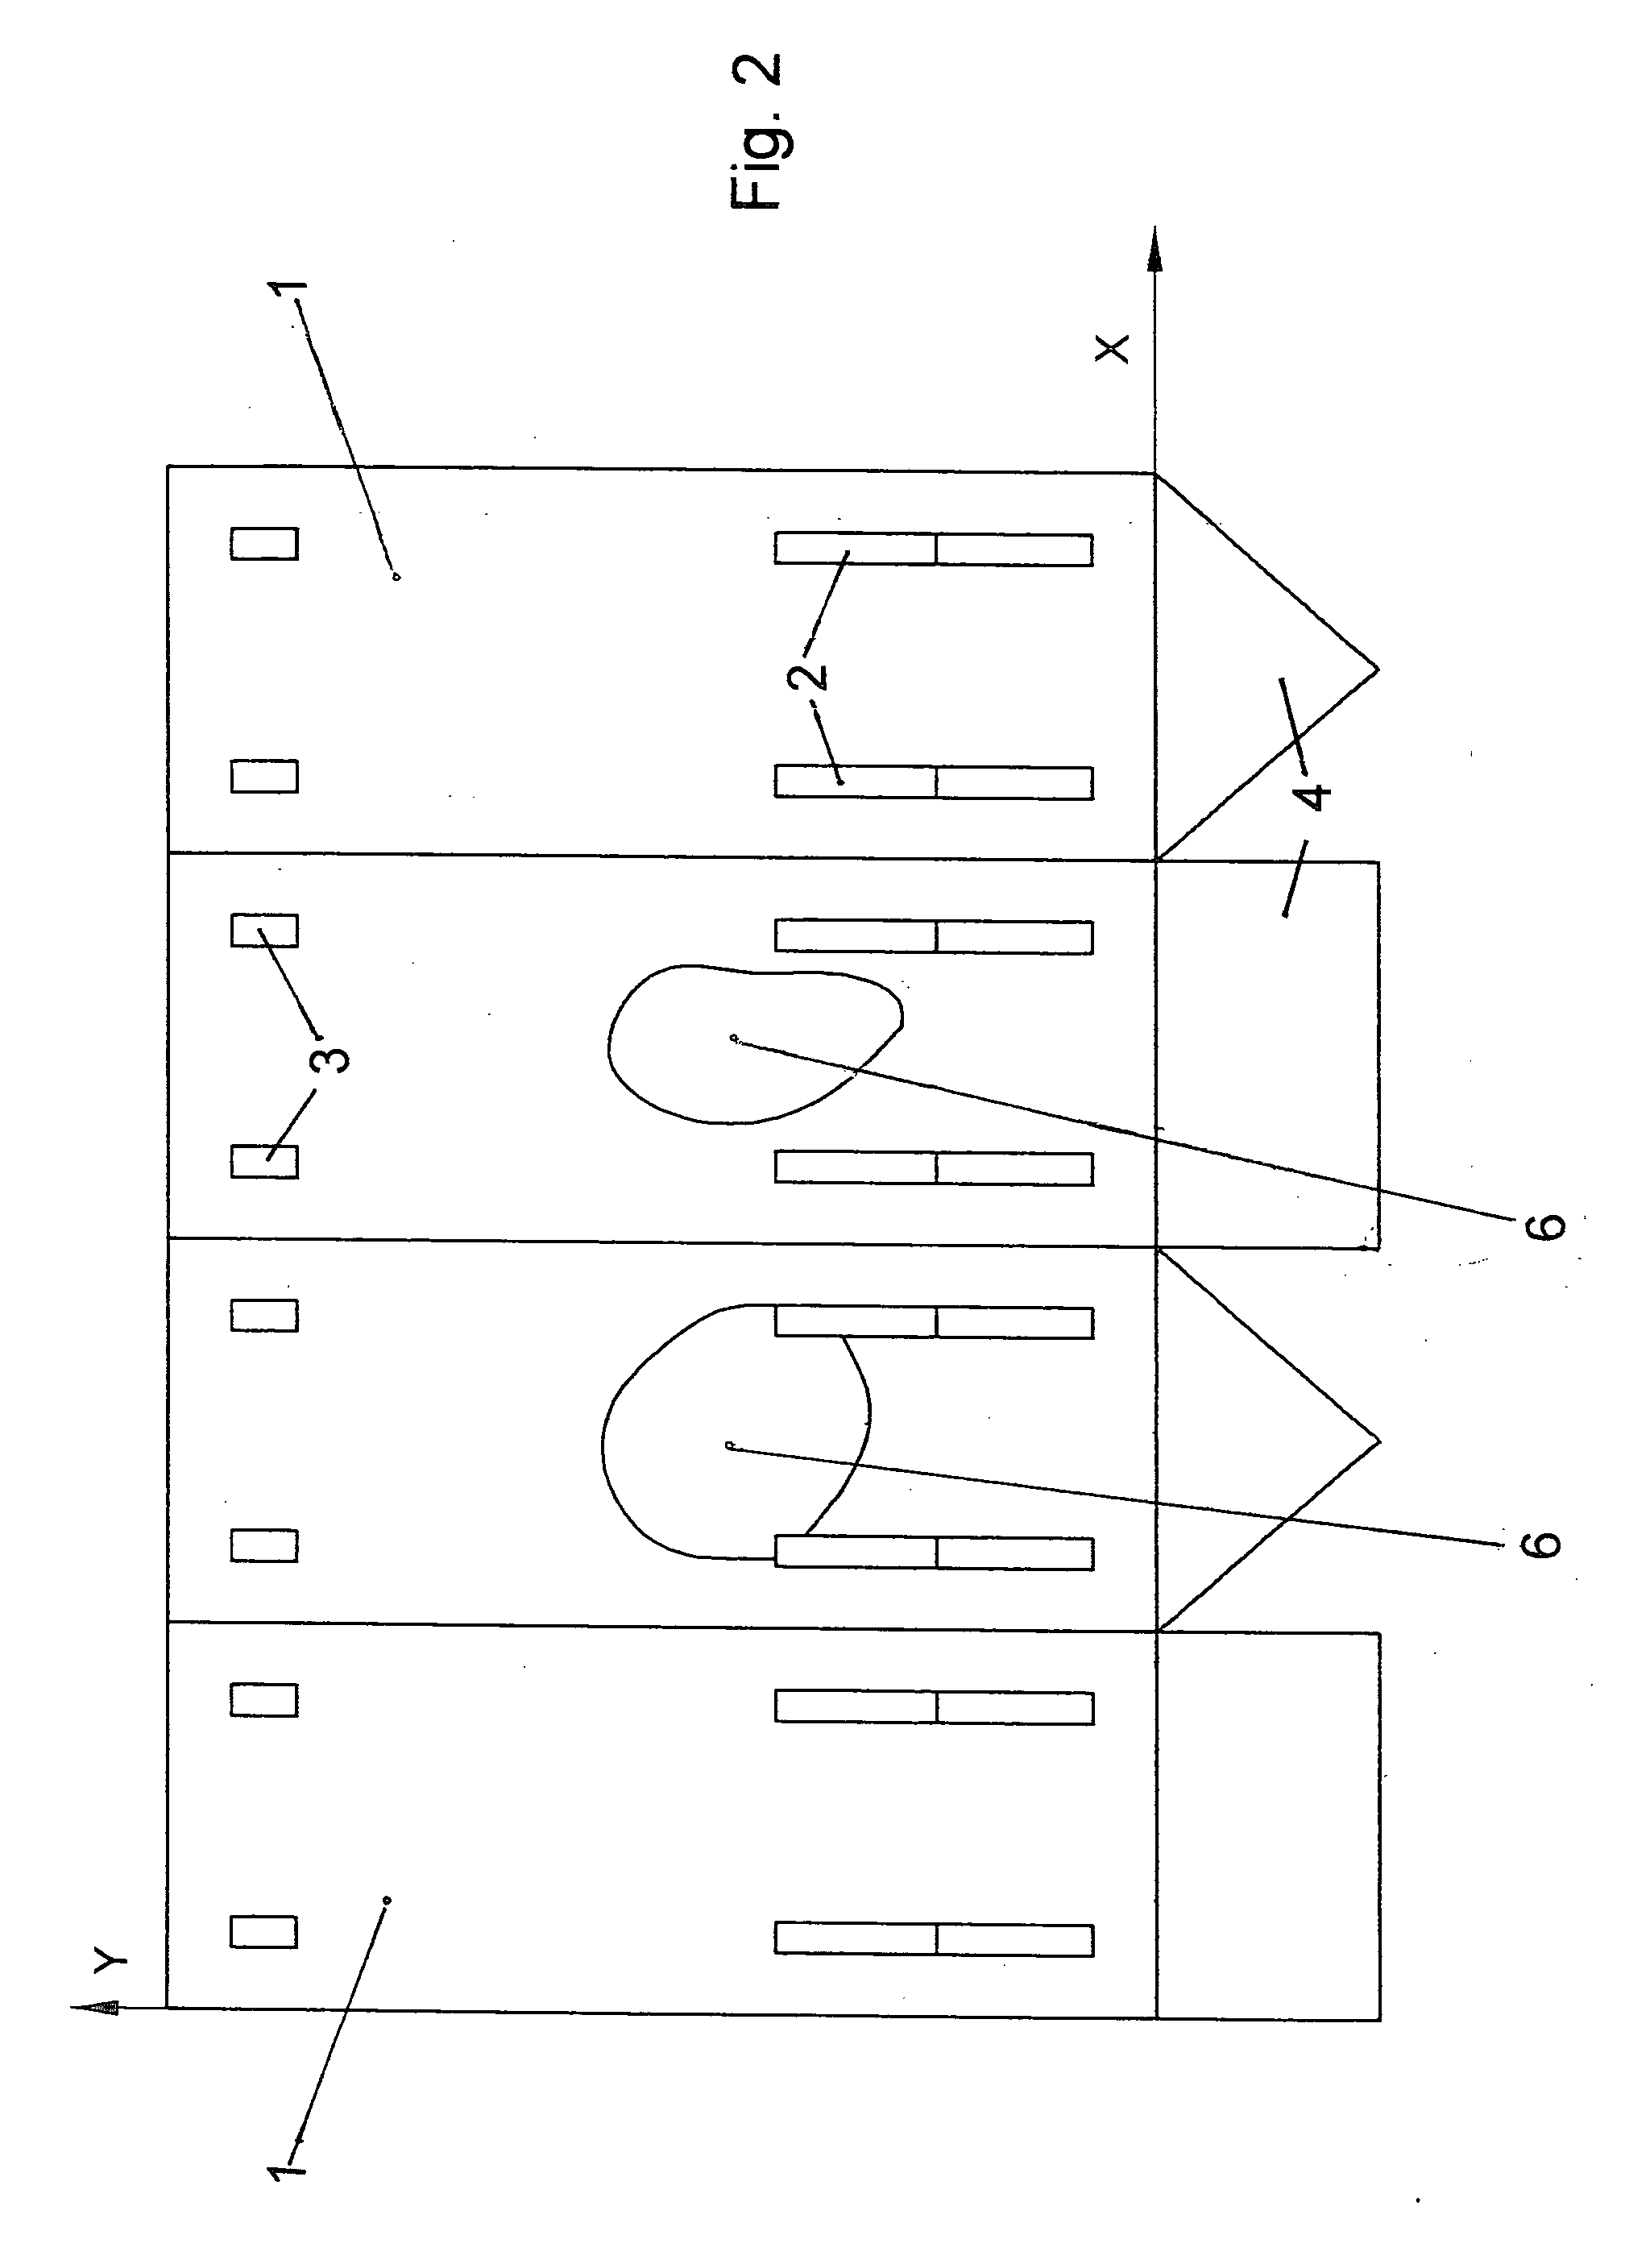 Method and apparatus for monitoring the formation of deposits in furnaces